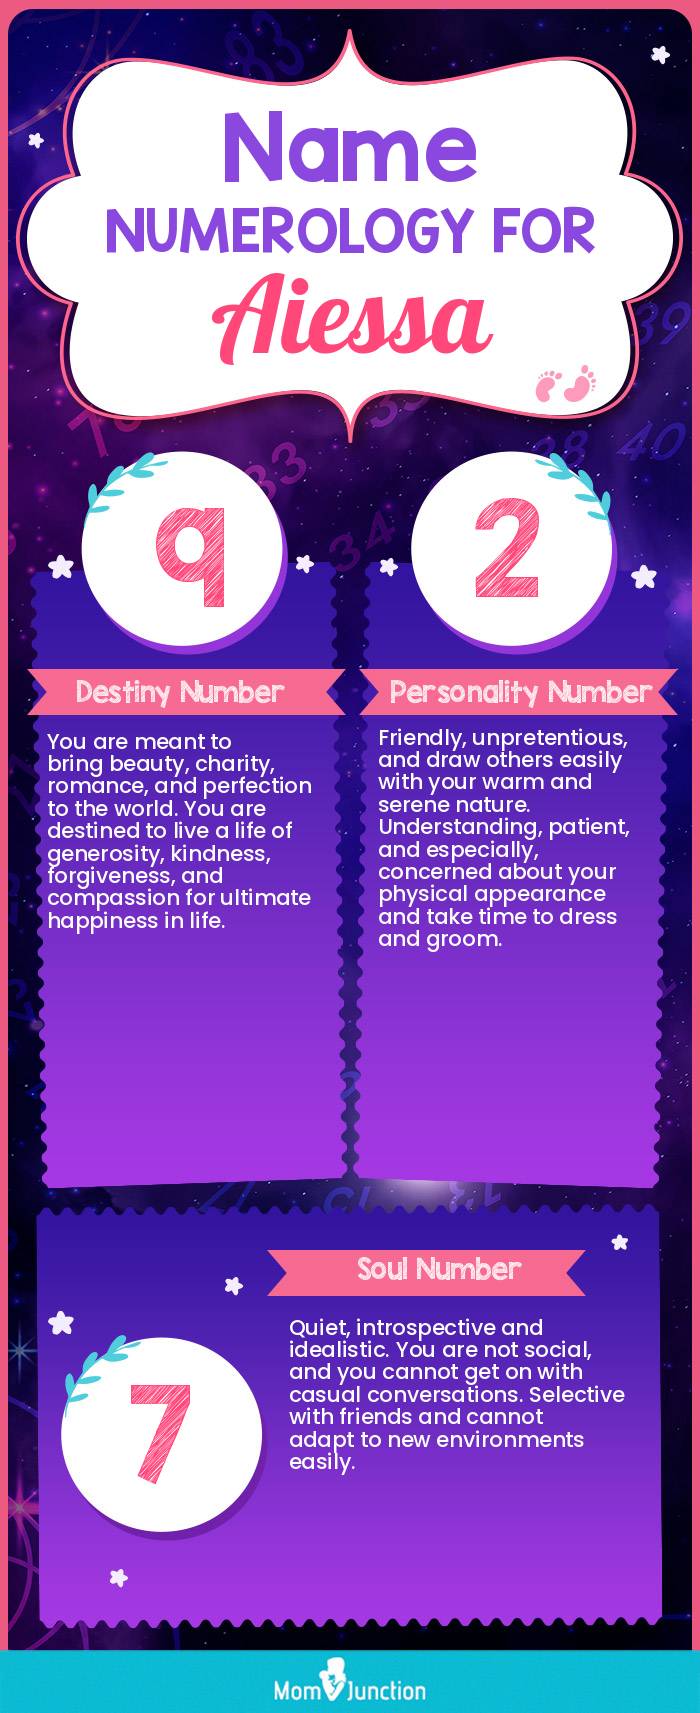 name-numerology-for-aiessa-girl